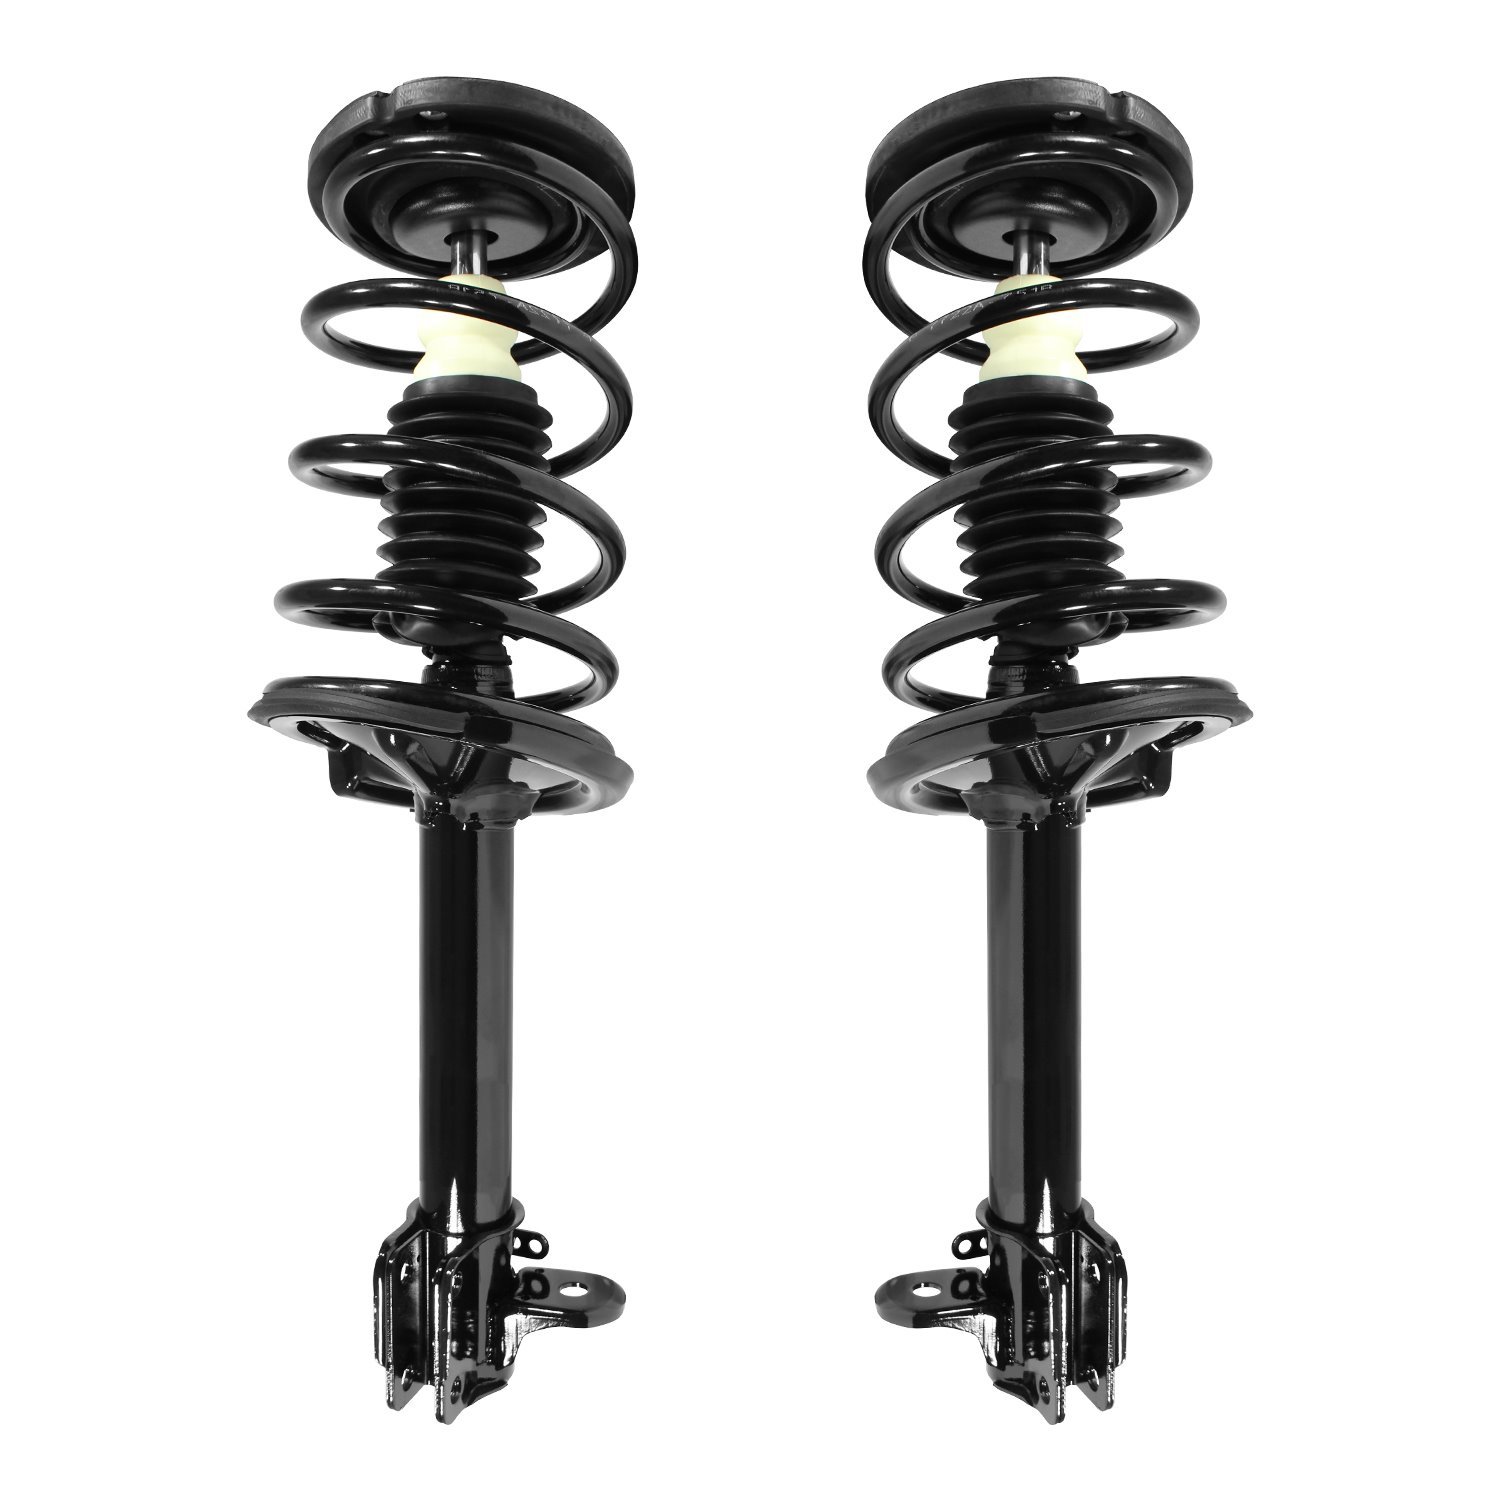 2-15211-15212-001 Suspension Strut & Coil Spring Assembly Set Fits Select Chrysler Neon, Dodge Neon, Dodge SX 2.0, Plymouth Neon